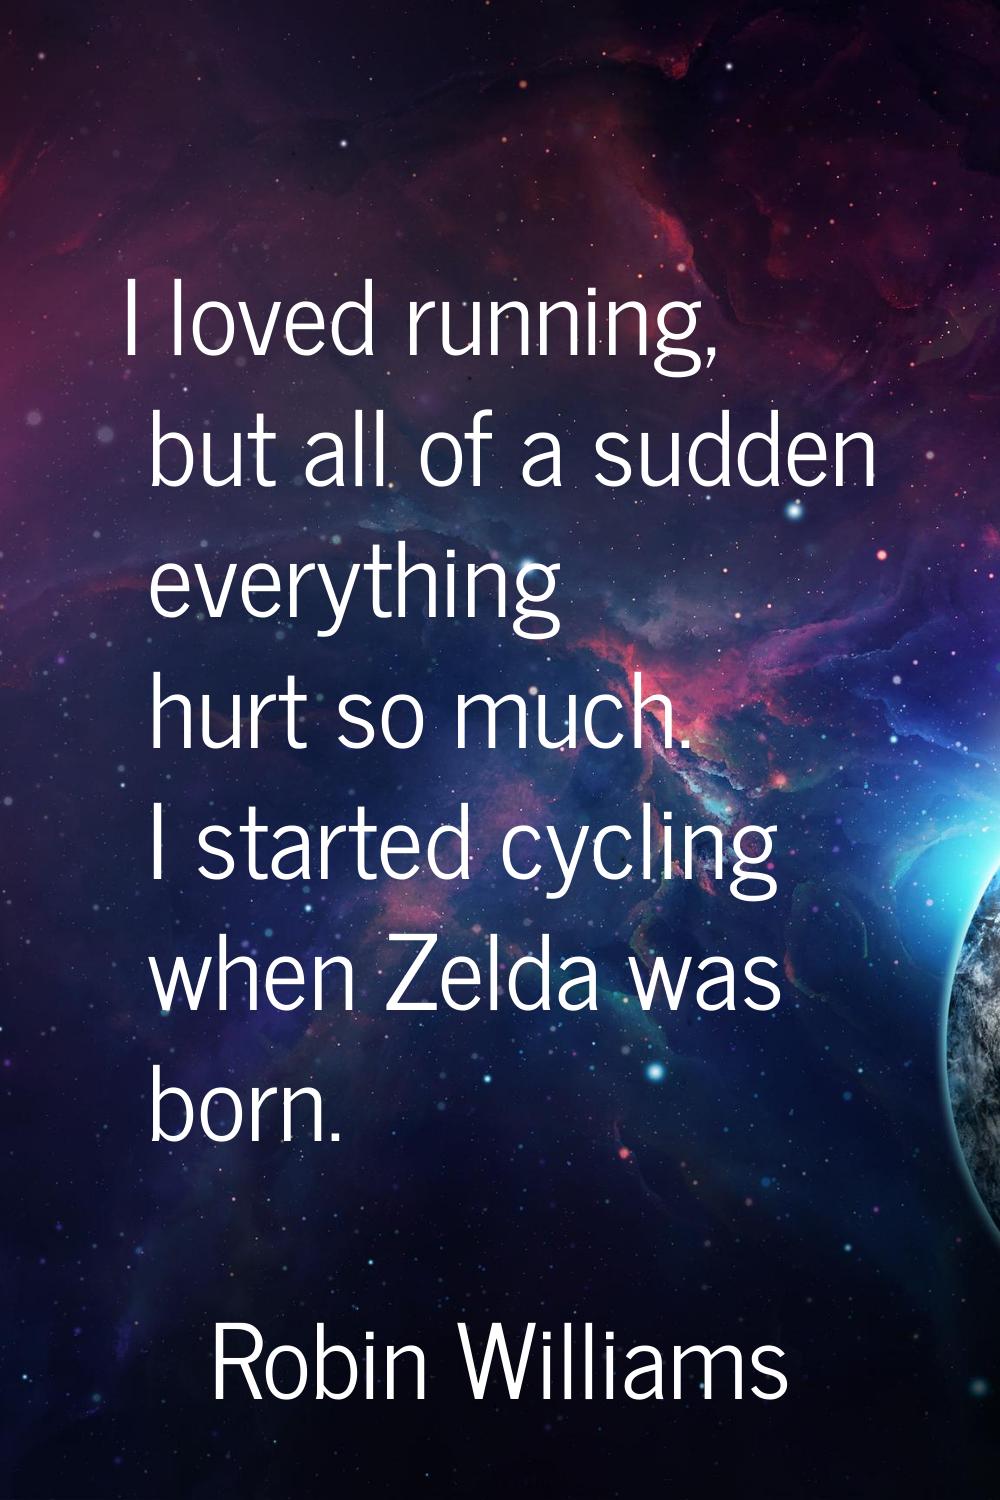 I loved running, but all of a sudden everything hurt so much. I started cycling when Zelda was born